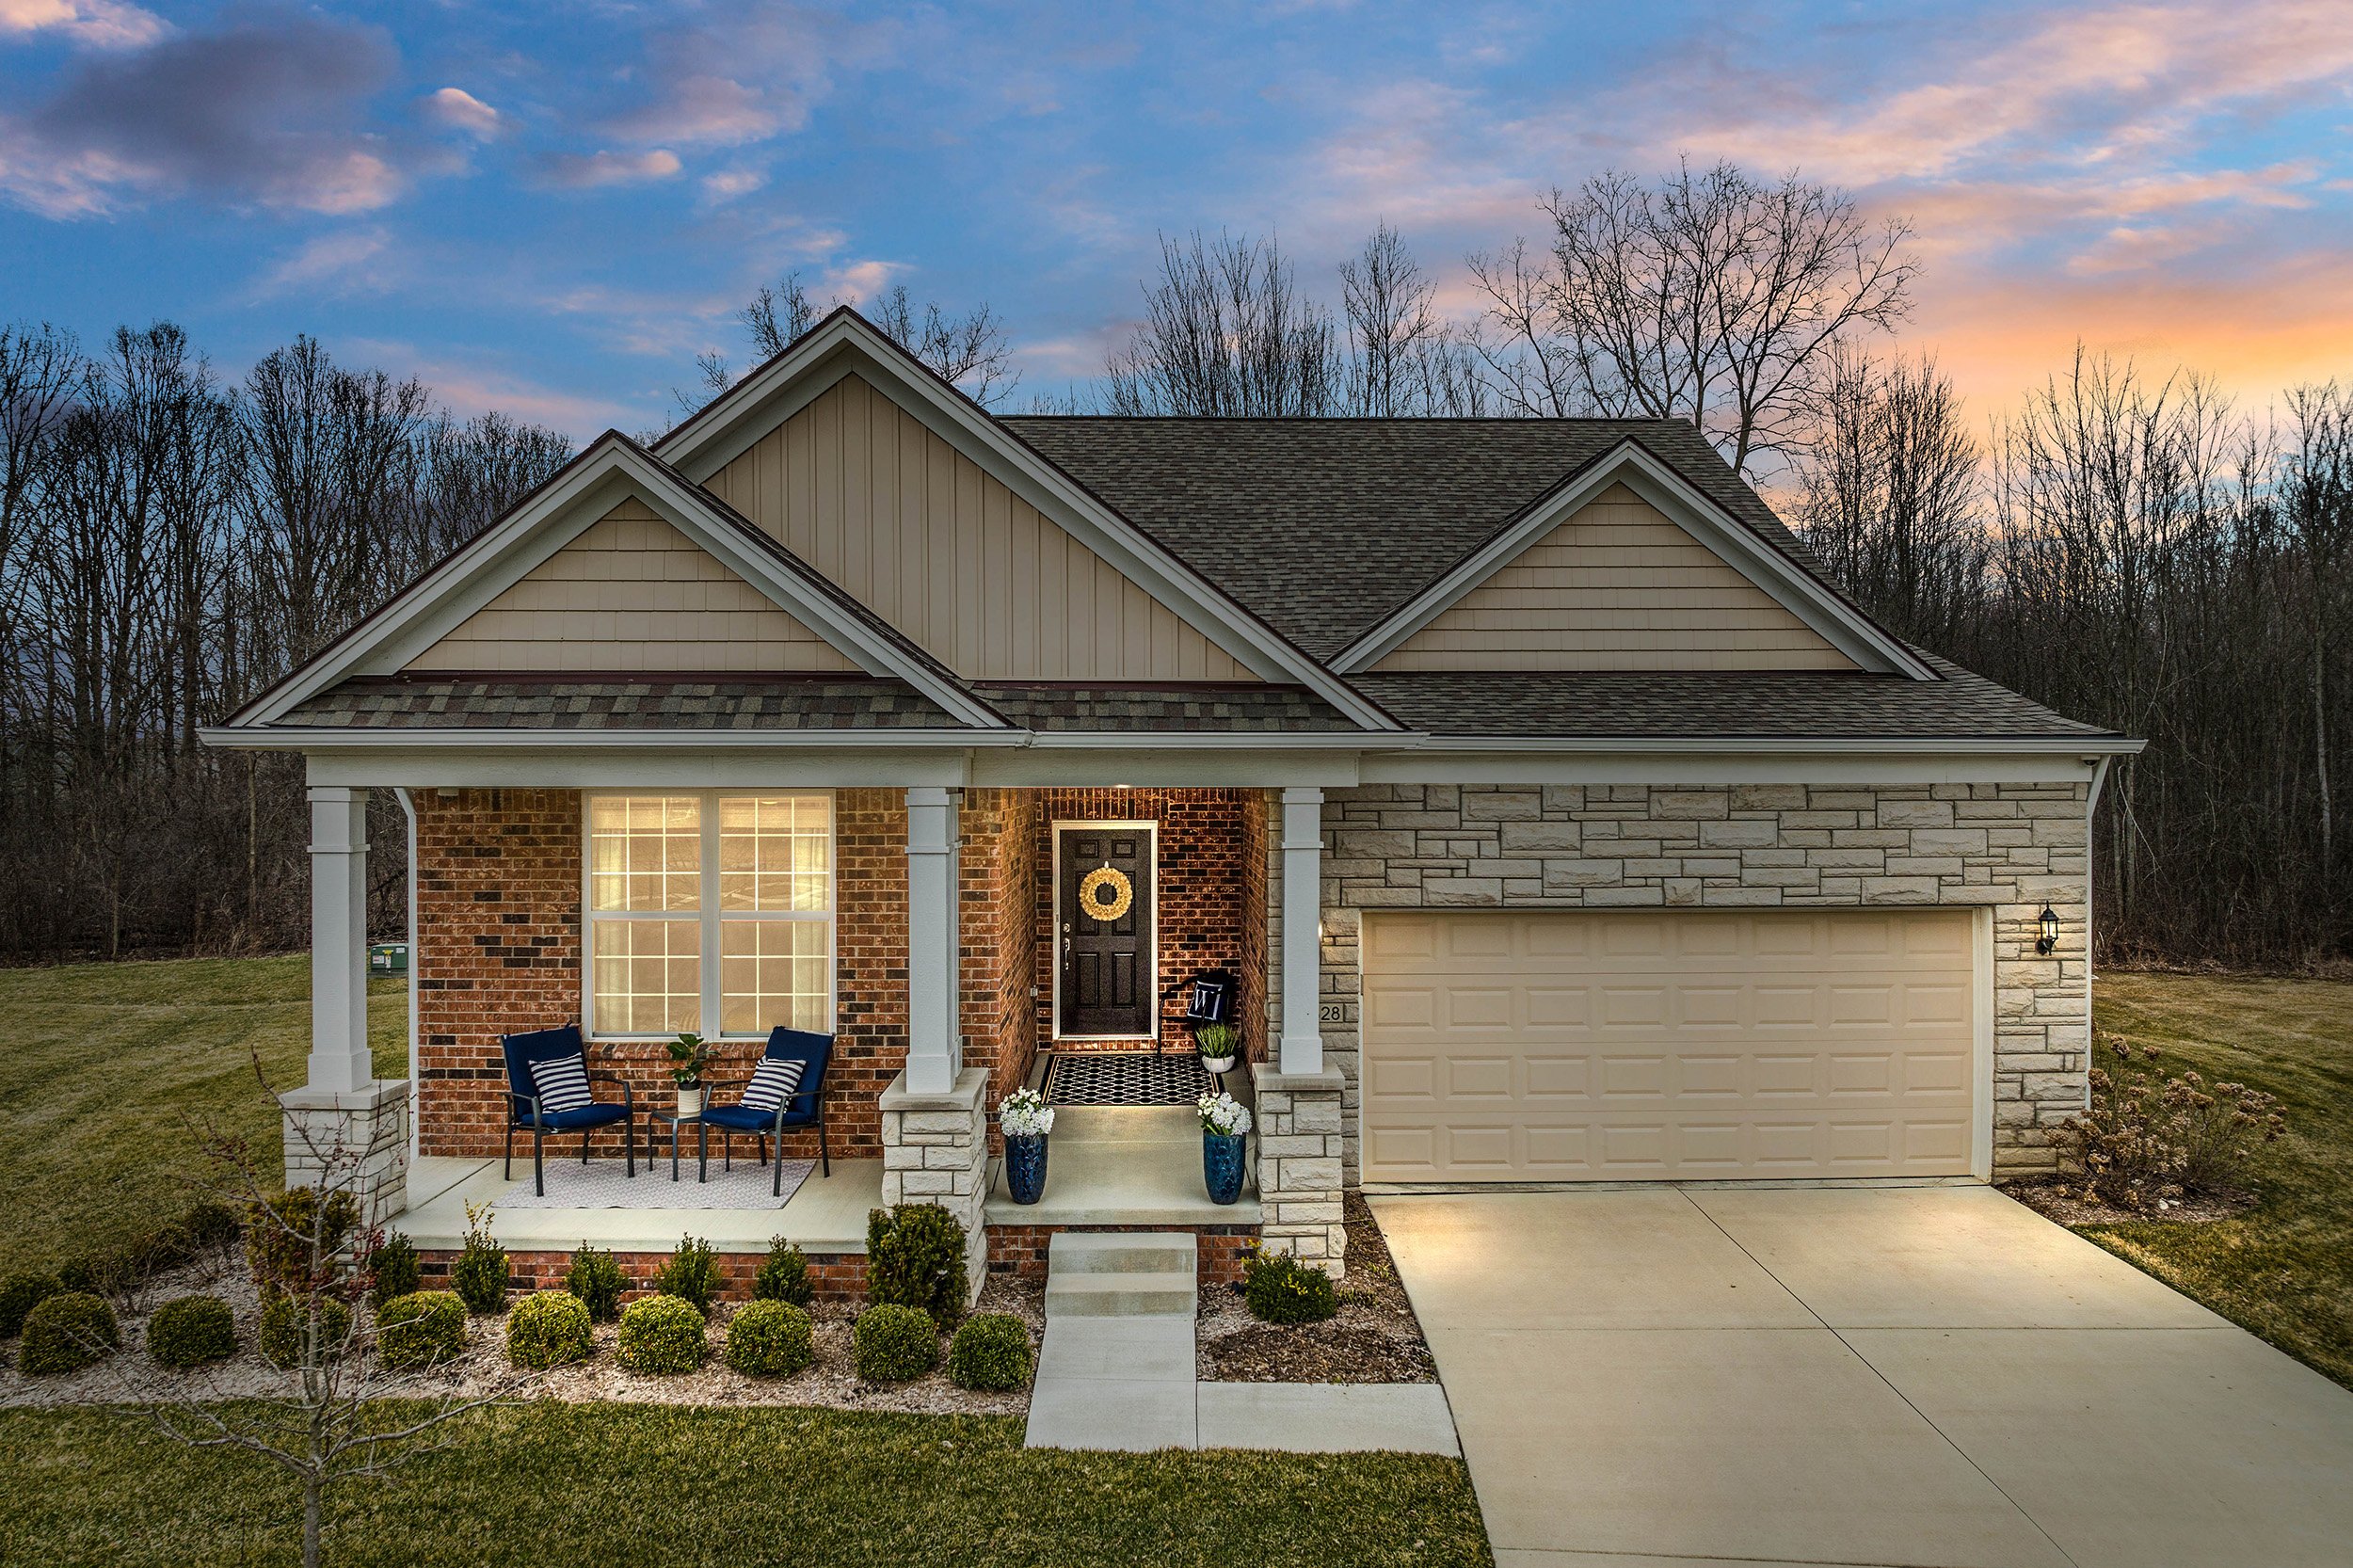  Canton Real Estate Photography - twilight exterior of cute bungalow with curb appeal 